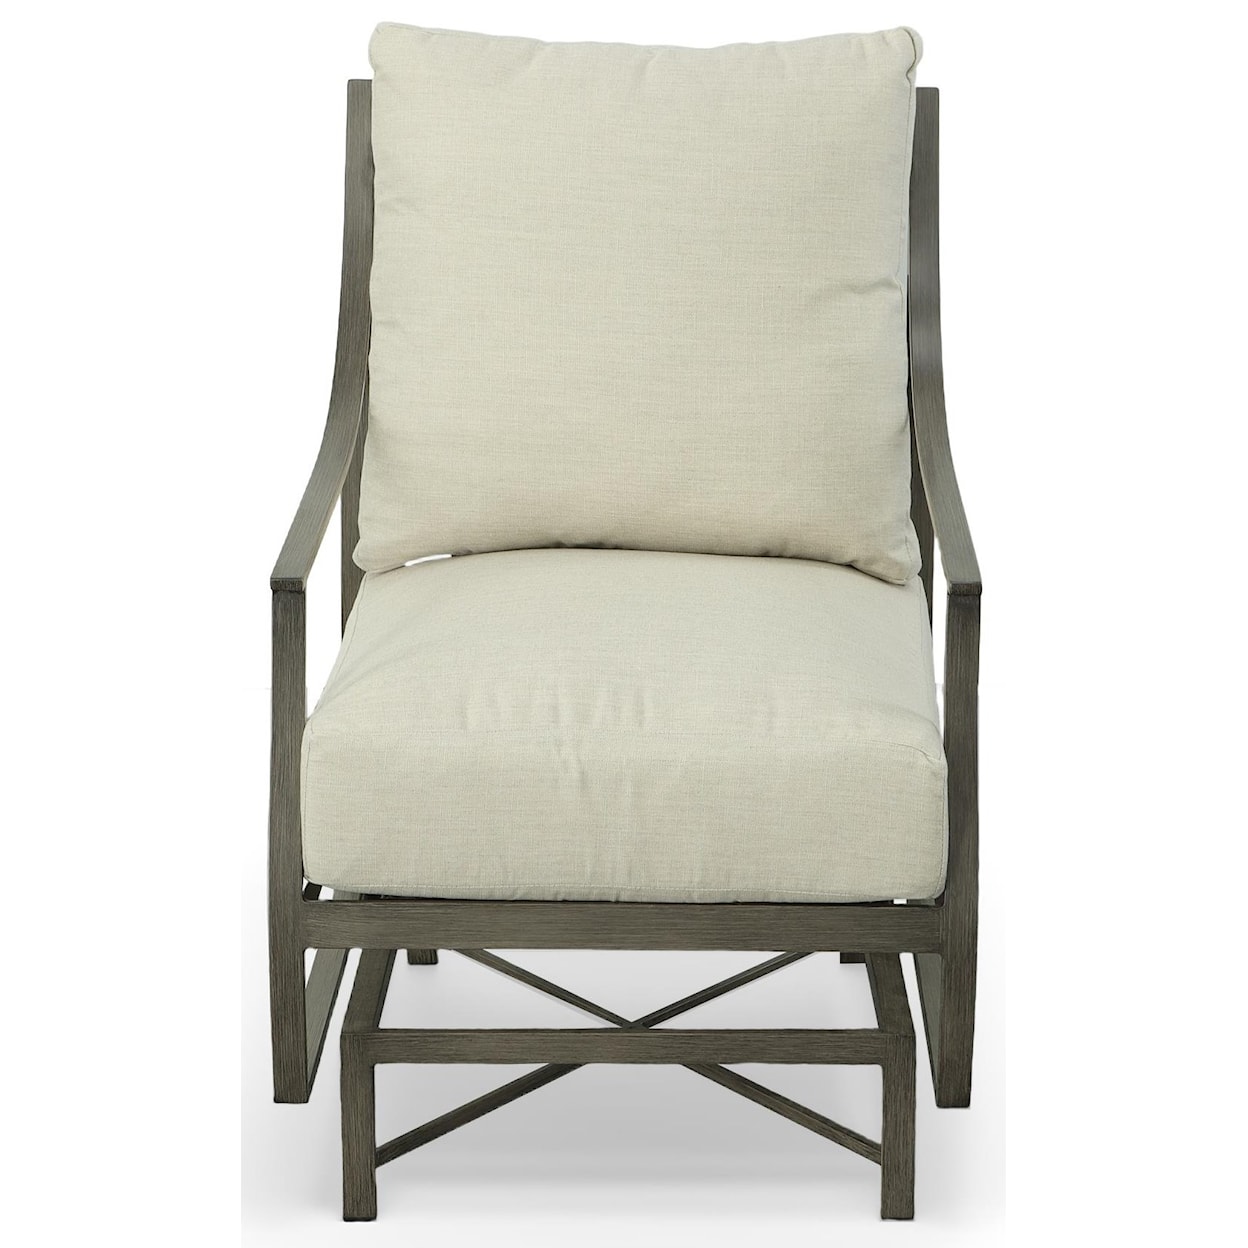 Summer Classics Monaco Outdoor Spring Lounge Chair